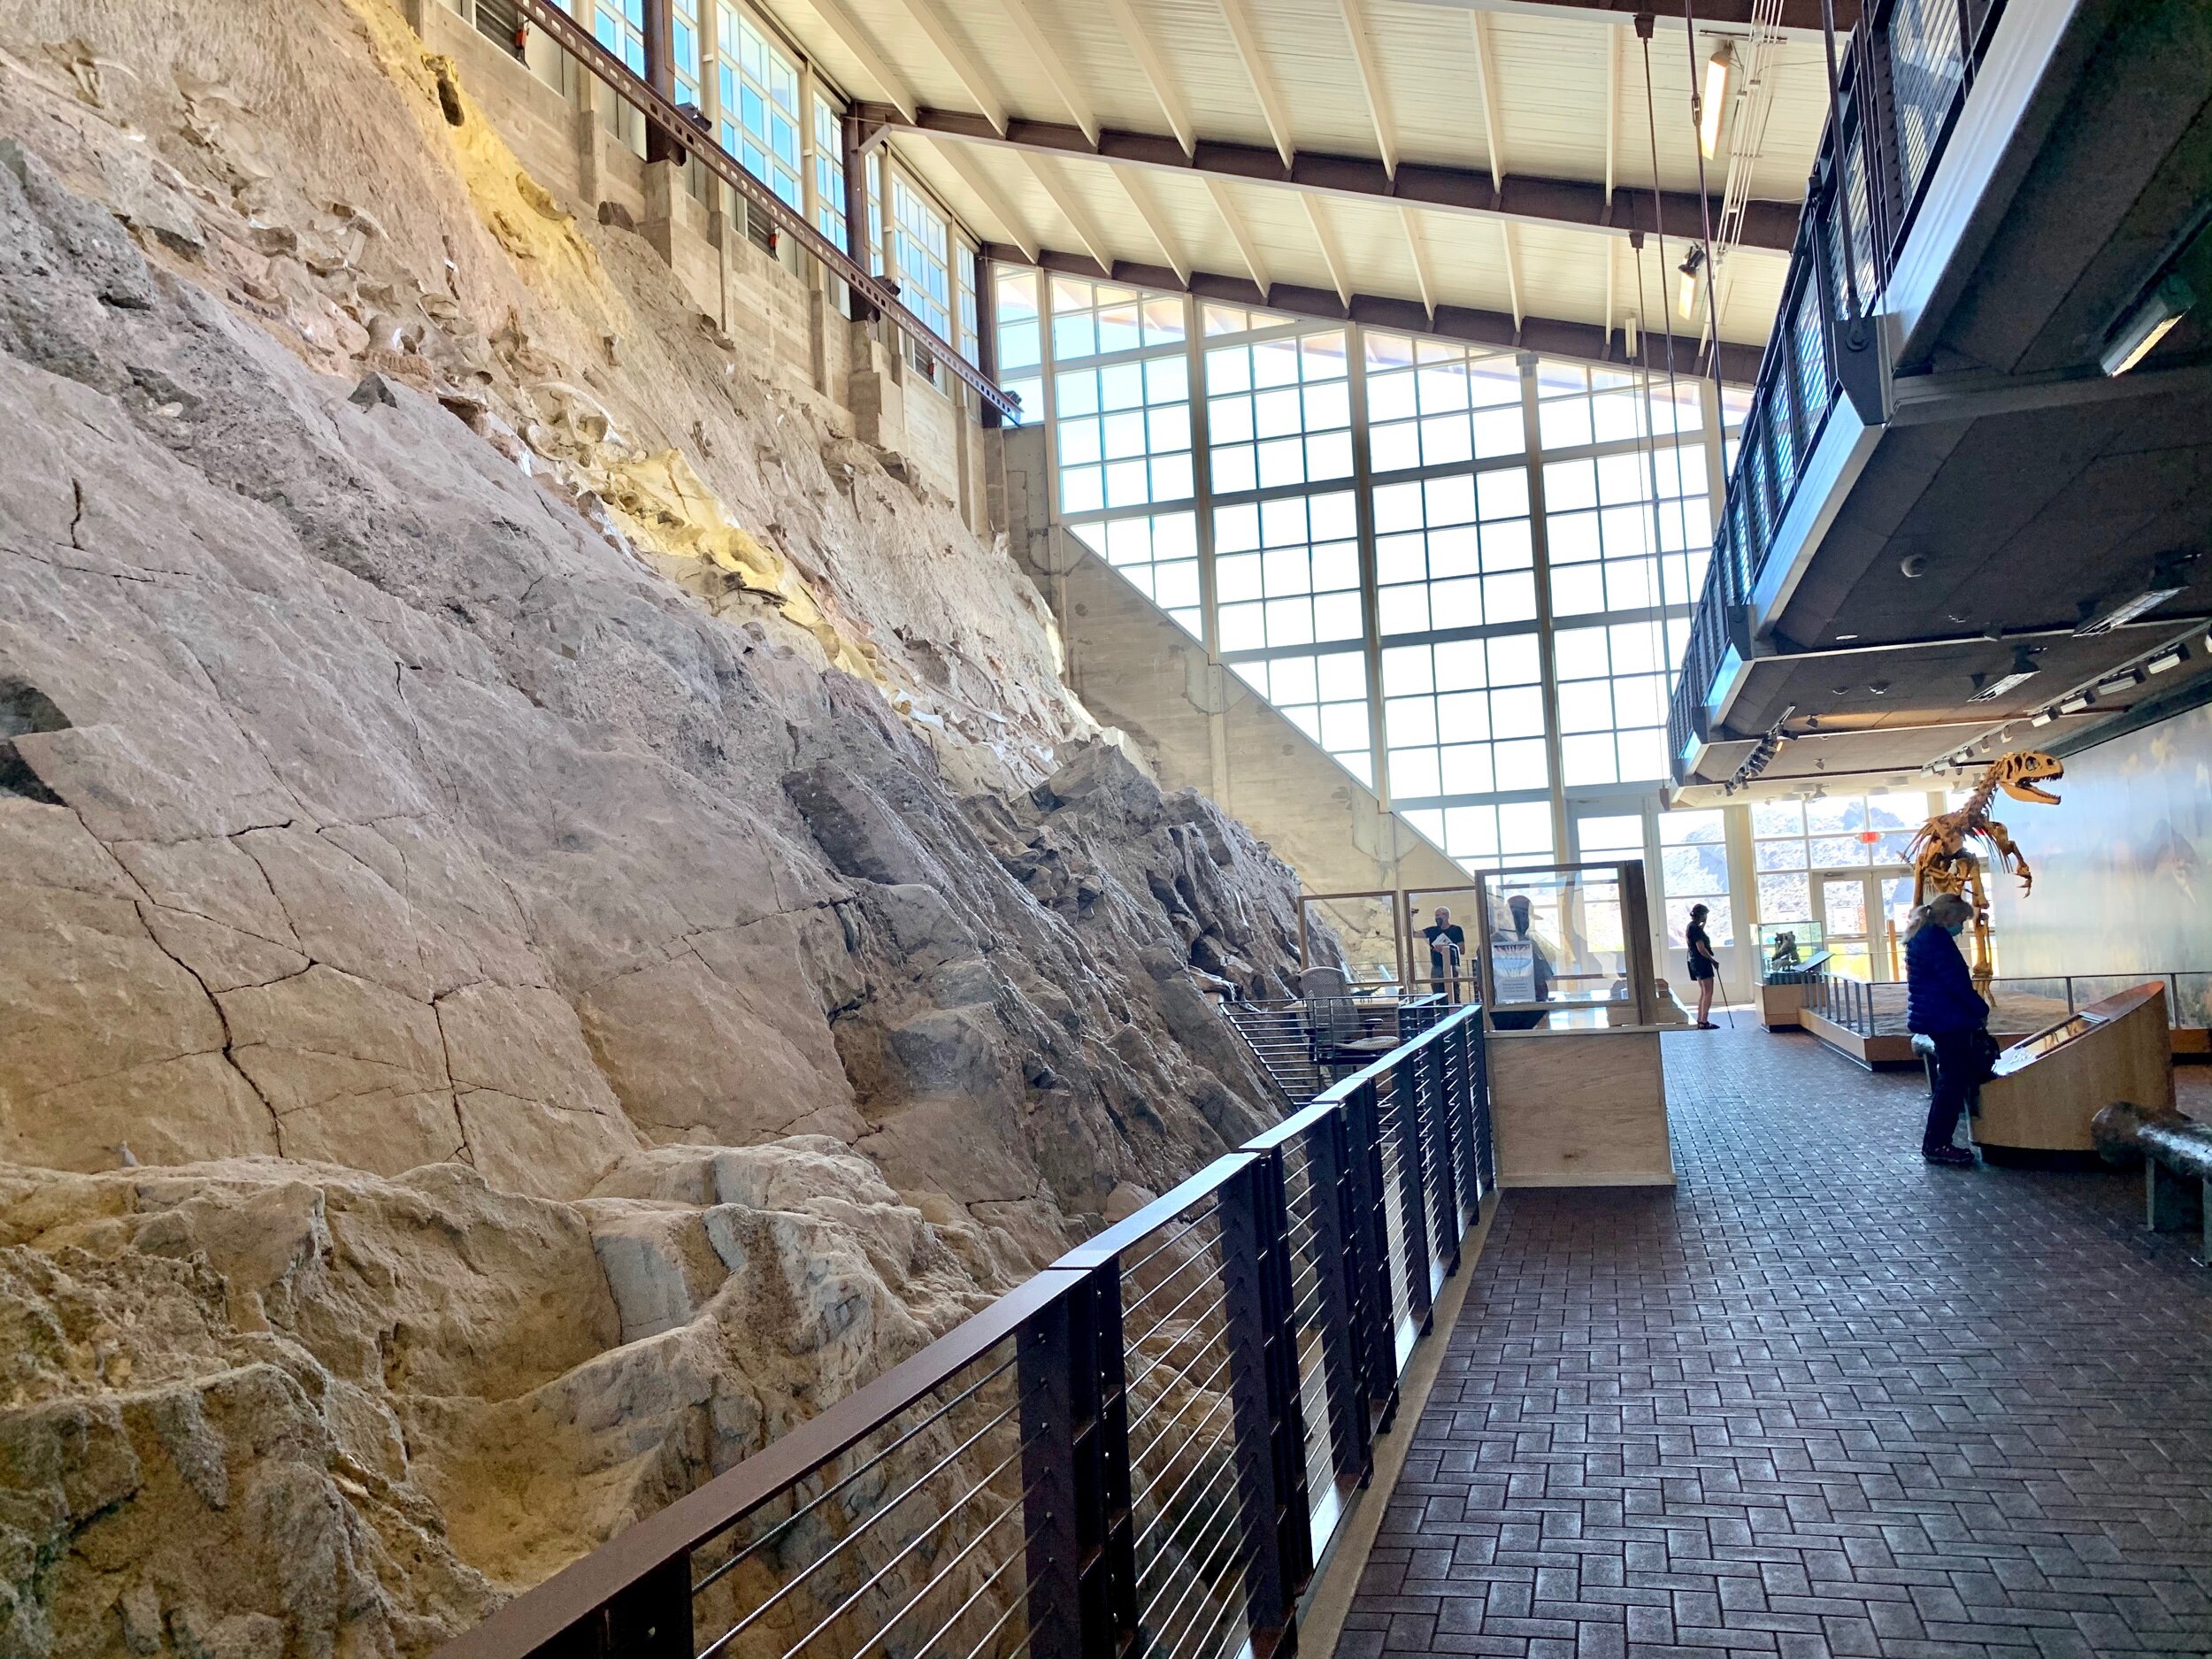  The  Quarry Exhibit Hall  in Dinosaur National Monument is a building made around dinosaur bones discovered, but never removed from the ground. The site is unusual because the bones are densely packed together and because this building was the dream